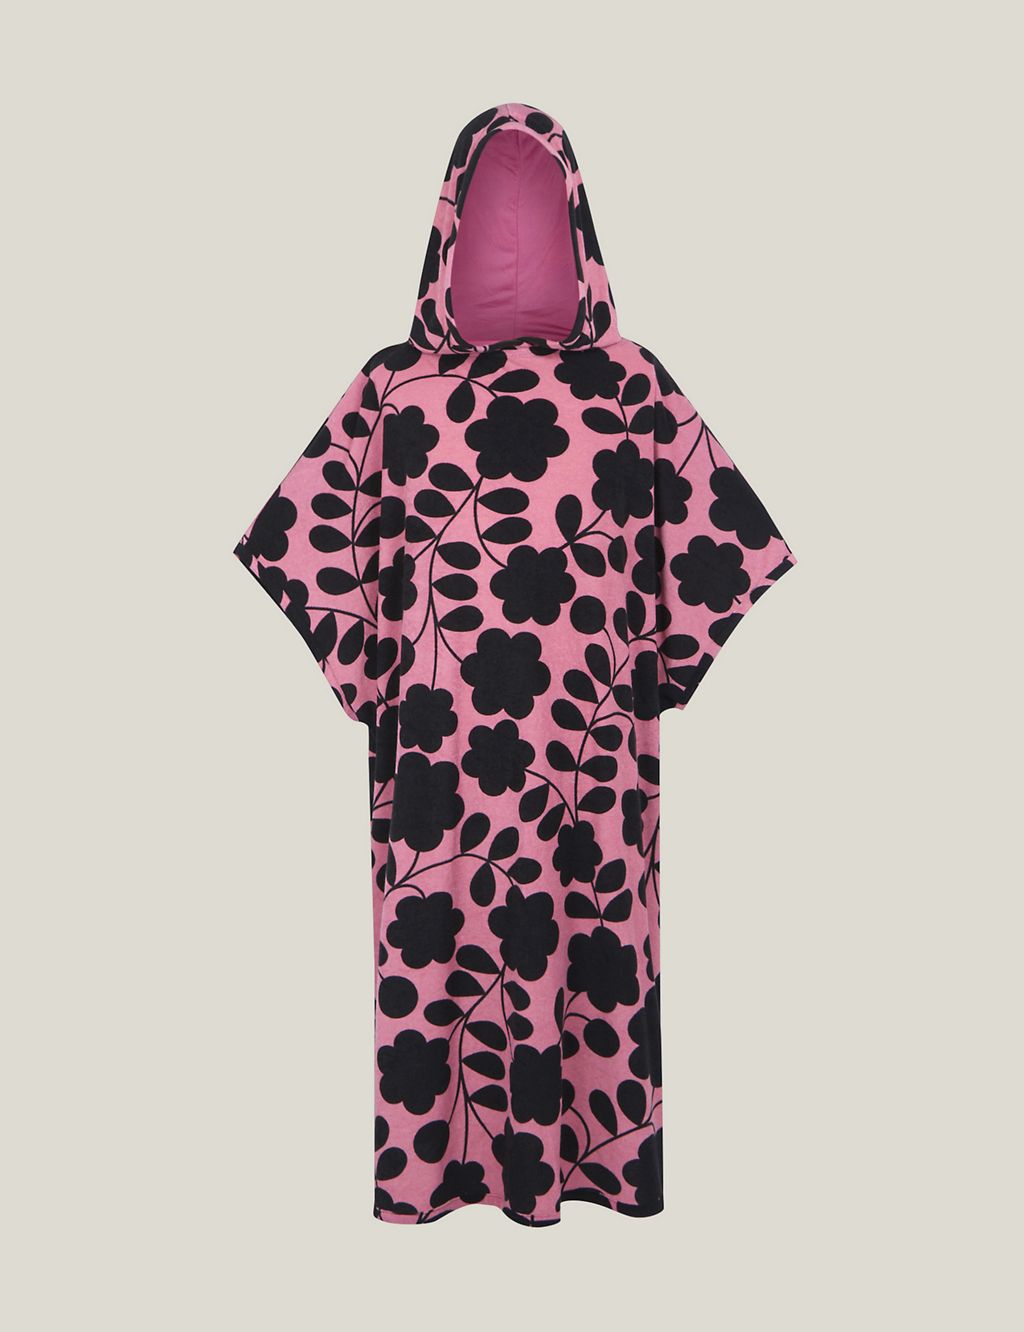 Orla Kiely Floral Towelling Robe 1 of 6